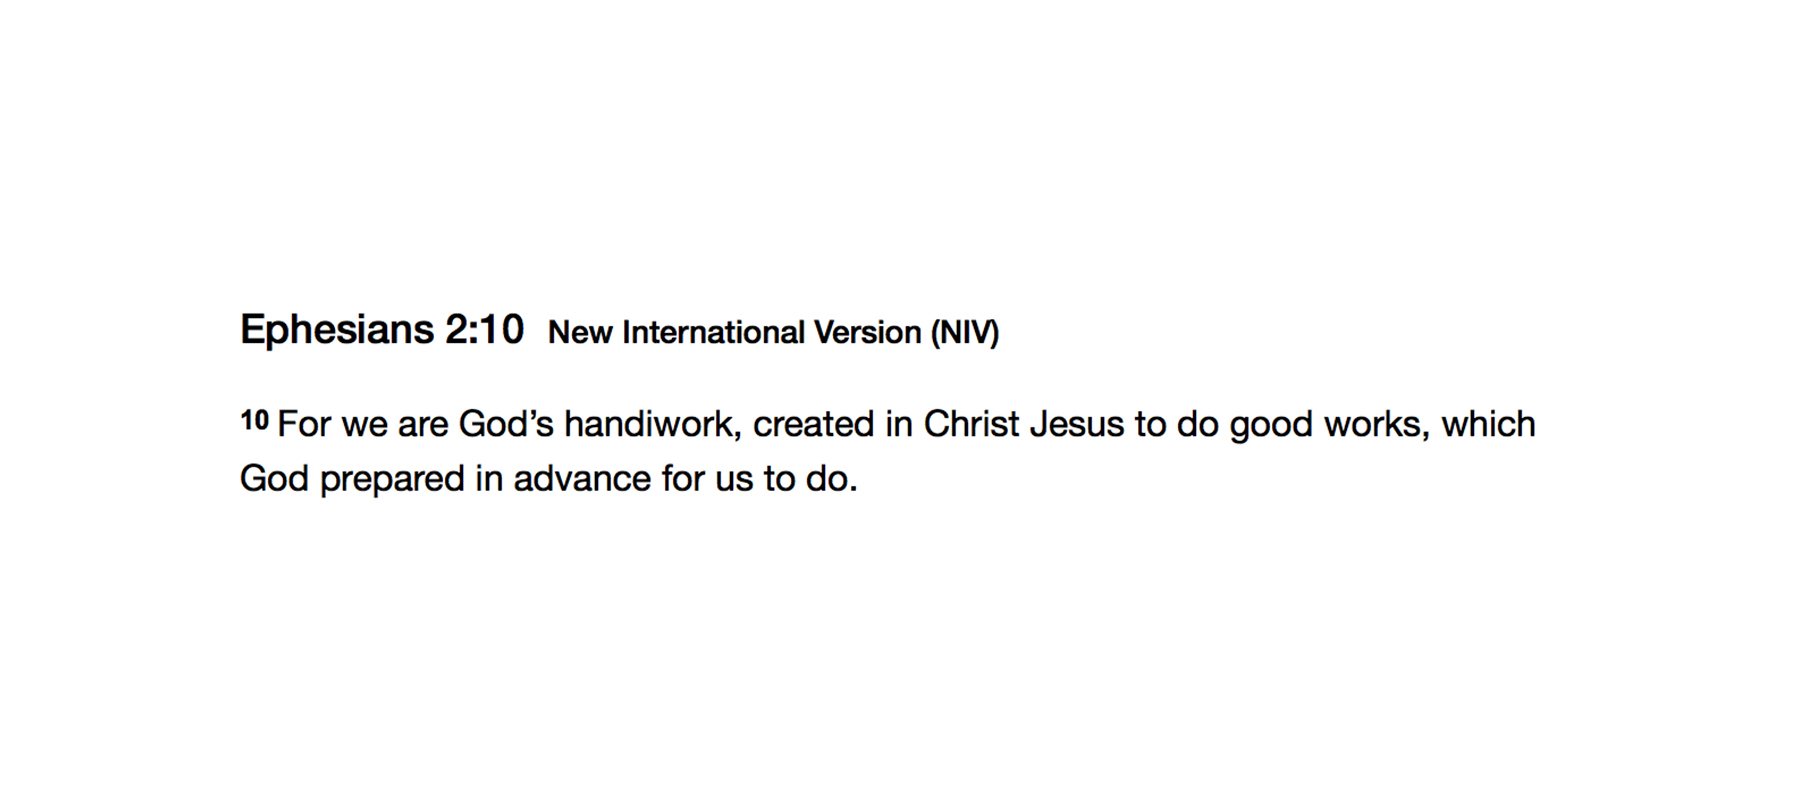 Ephesians 2:10: God's Workmanship and Our Works